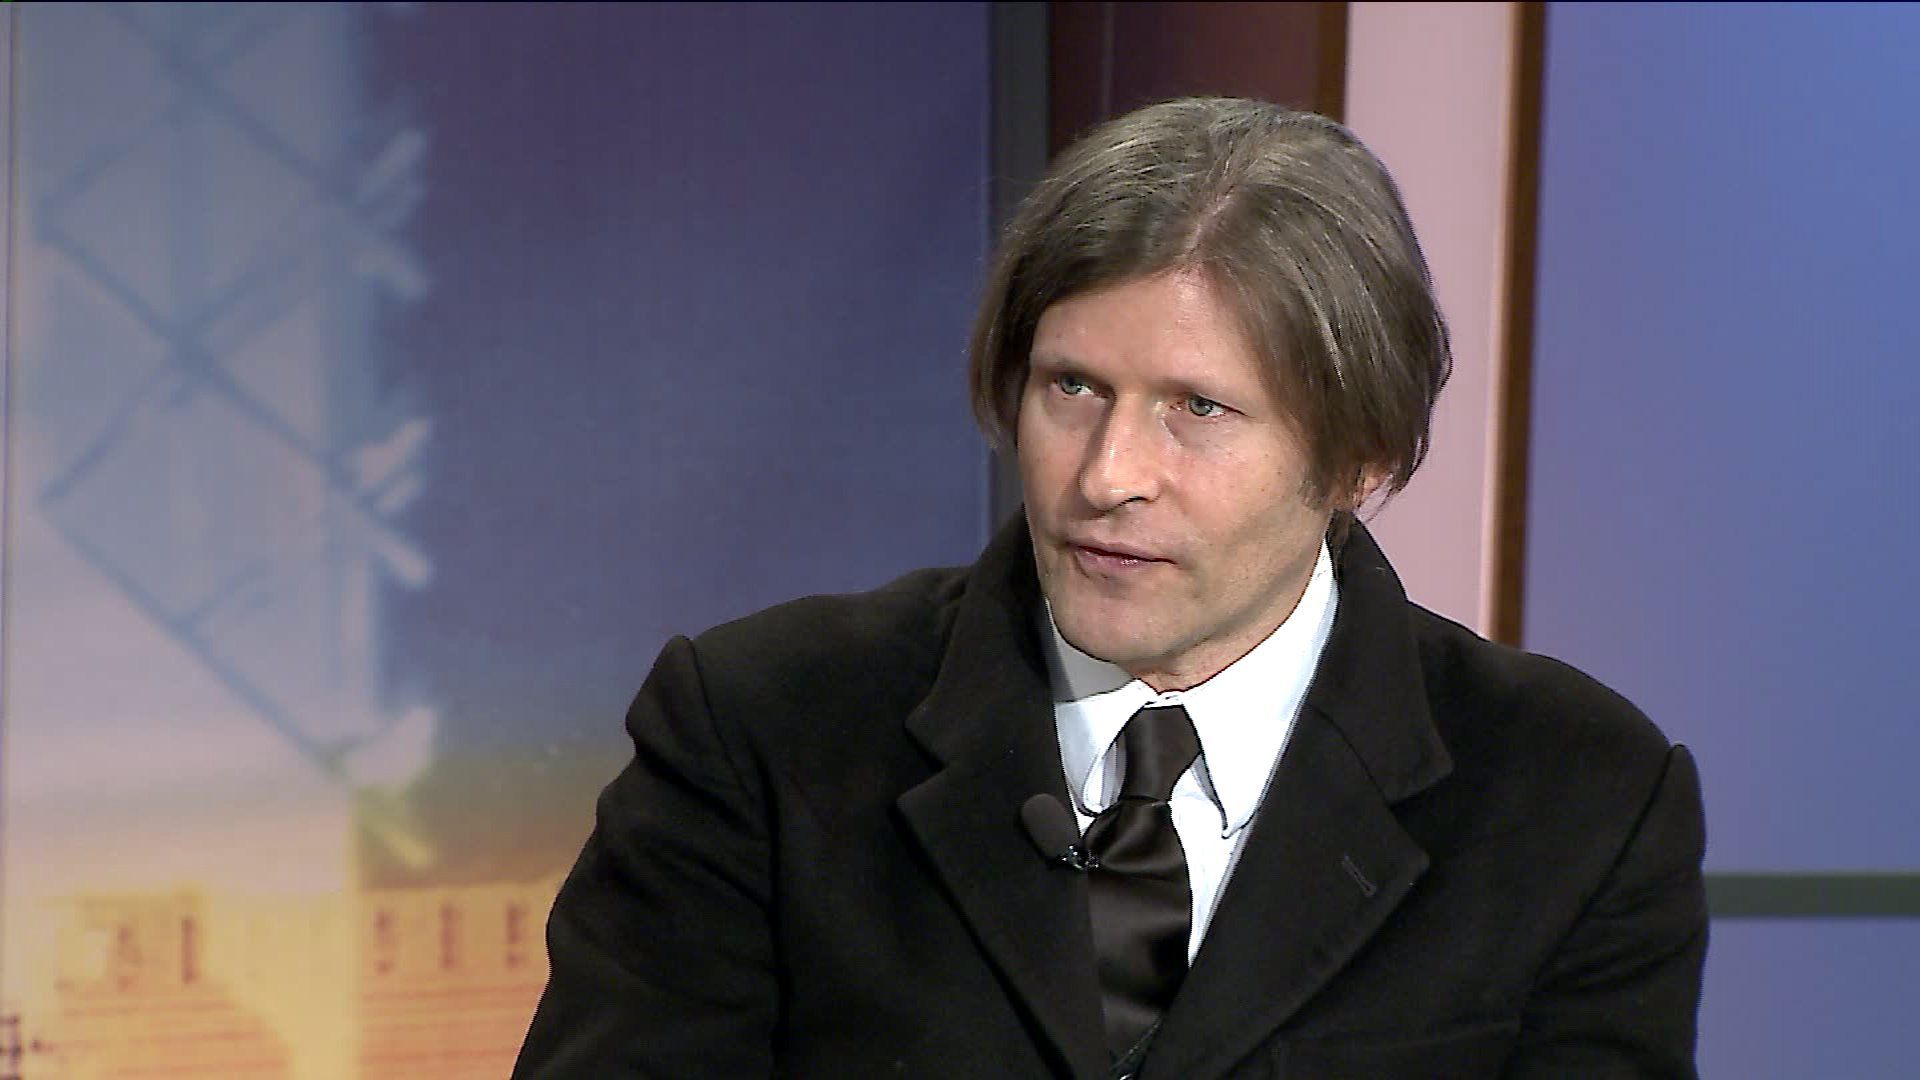 Crispin Glover on new movie “The Bag Man” and his different roles